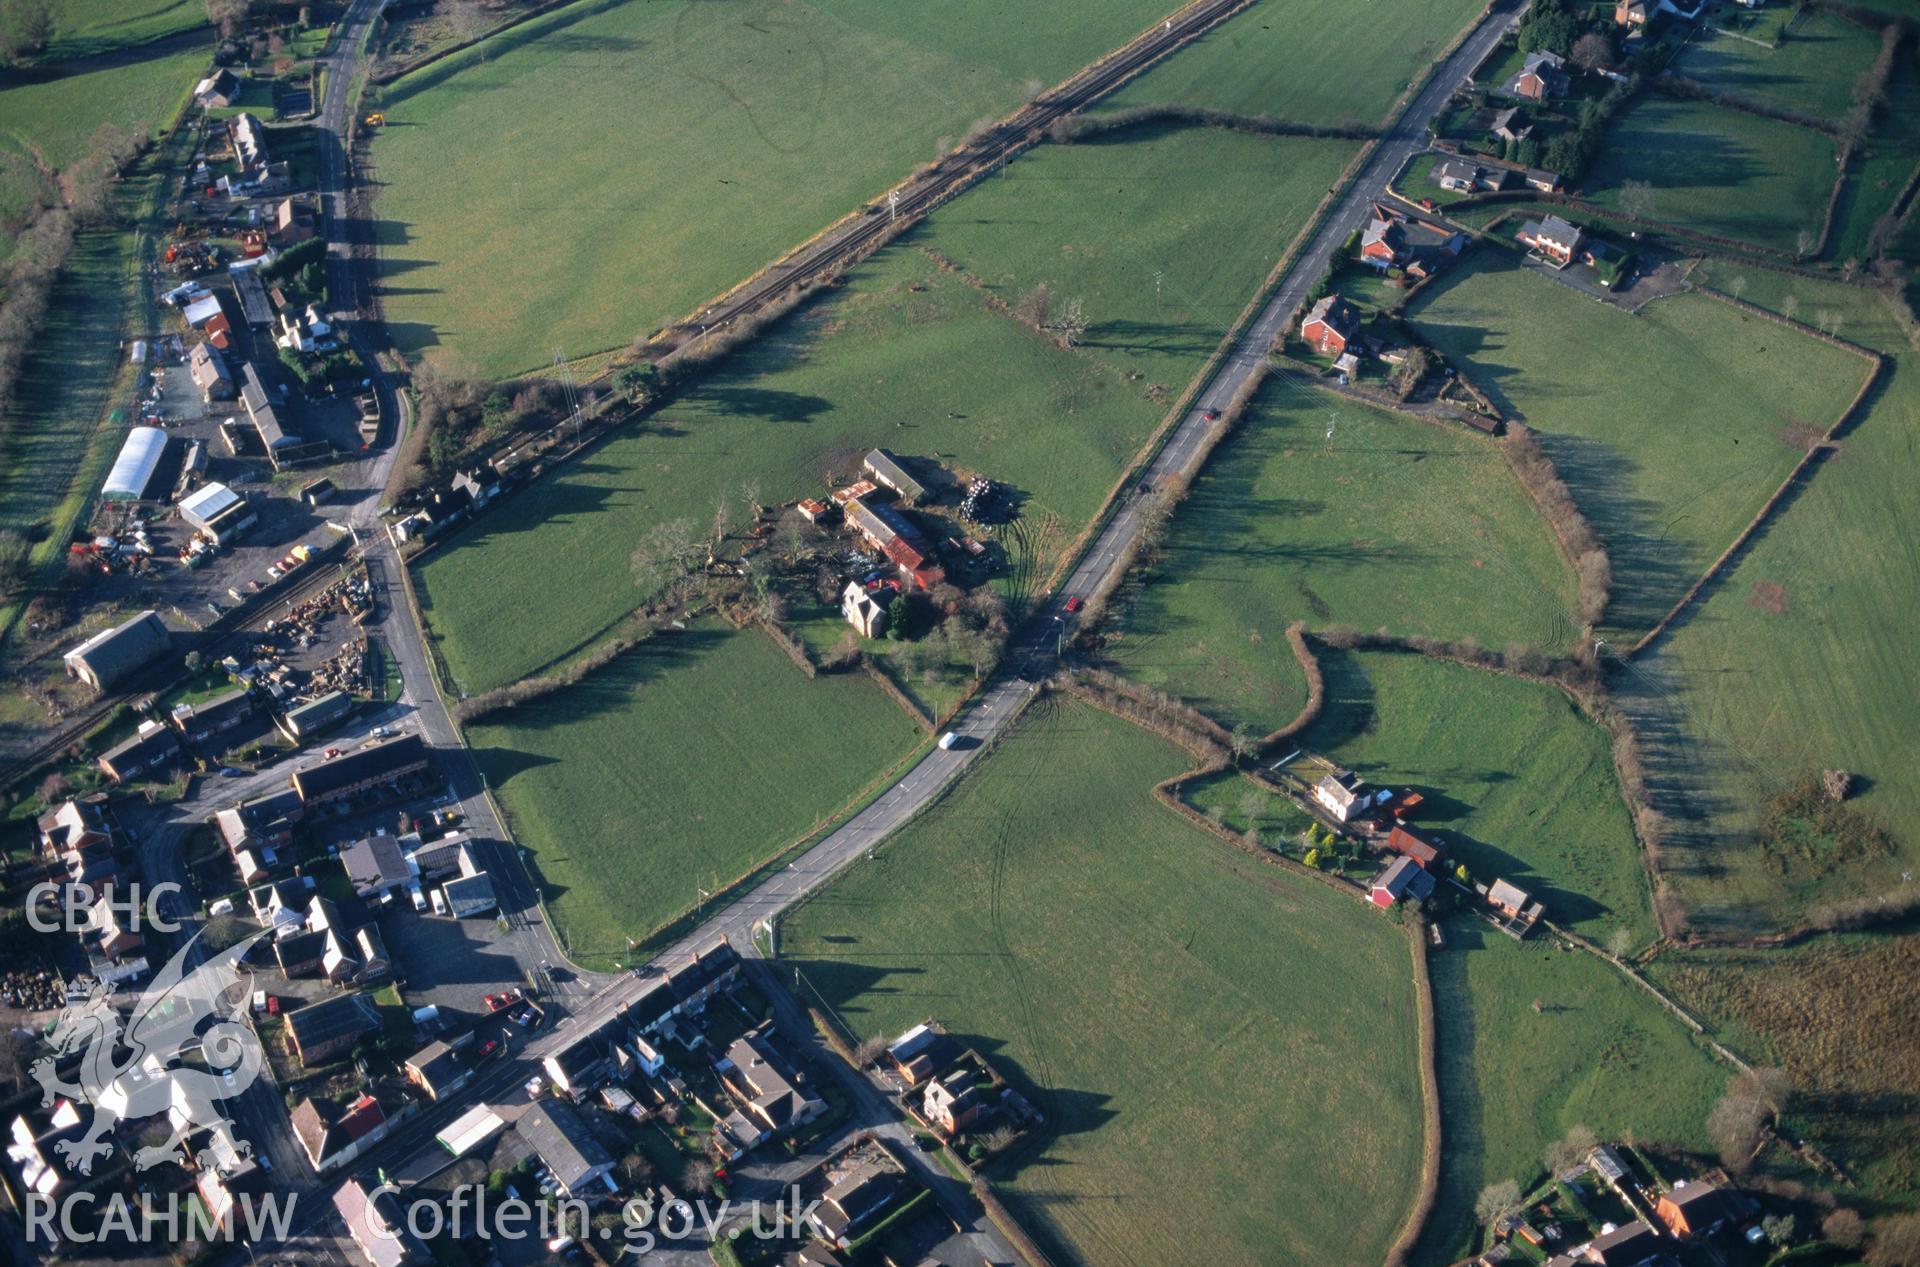 Slide of RCAHMW colour oblique aerial photograph of Caersws Roman Fort, taken by C.R. Musson, 20/12/1998.